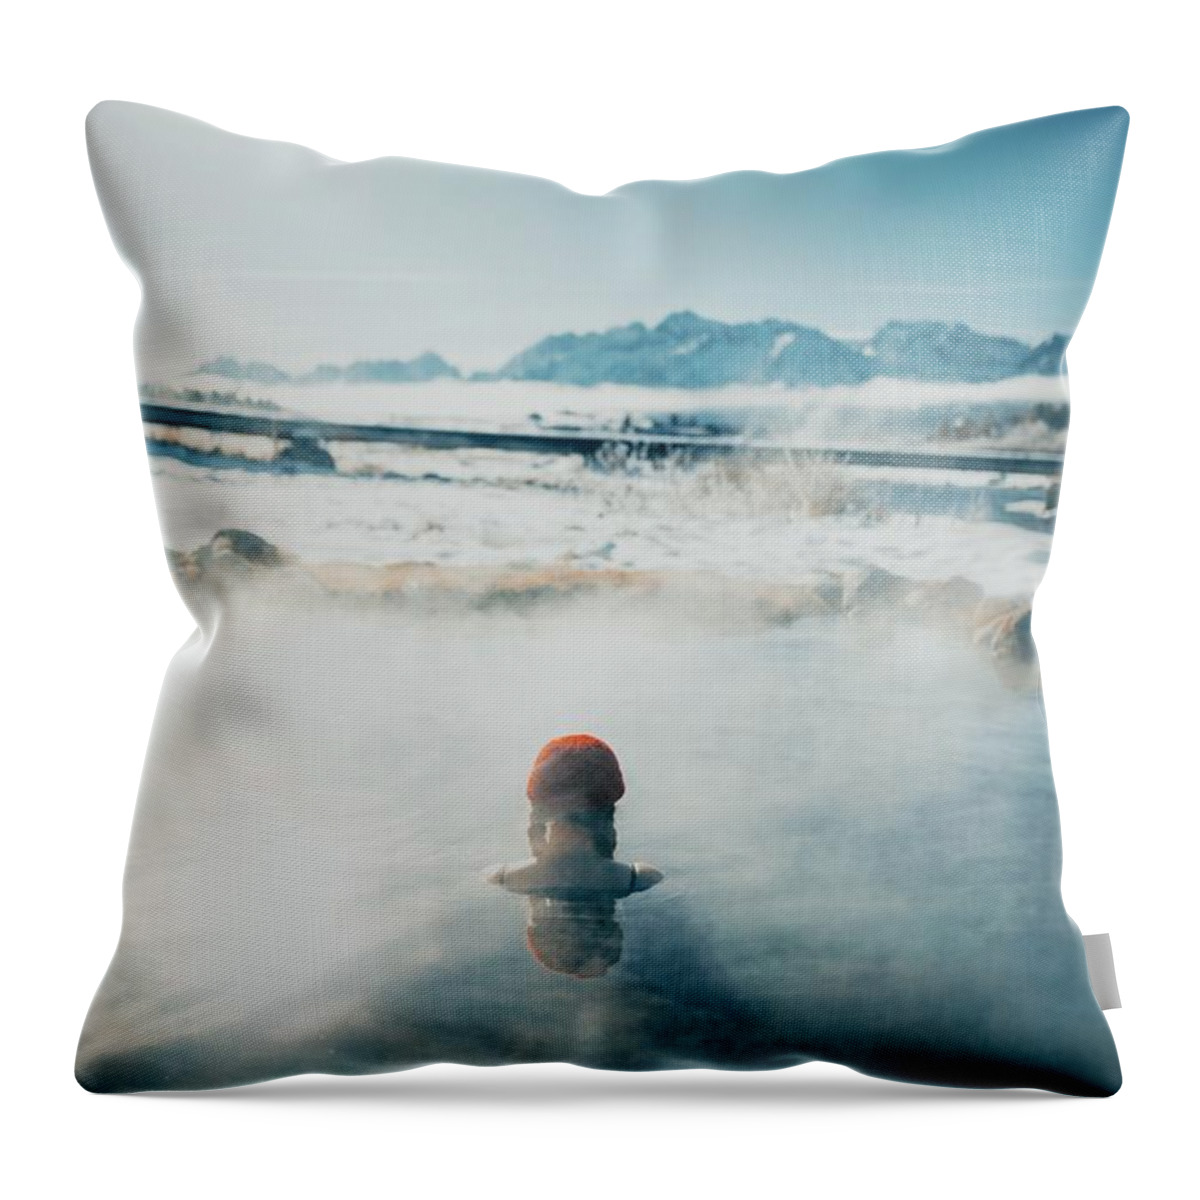 People Throw Pillow featuring the photograph Woman Bathing In Hot Spring, Sawtooth by Sam Brockway / 500px